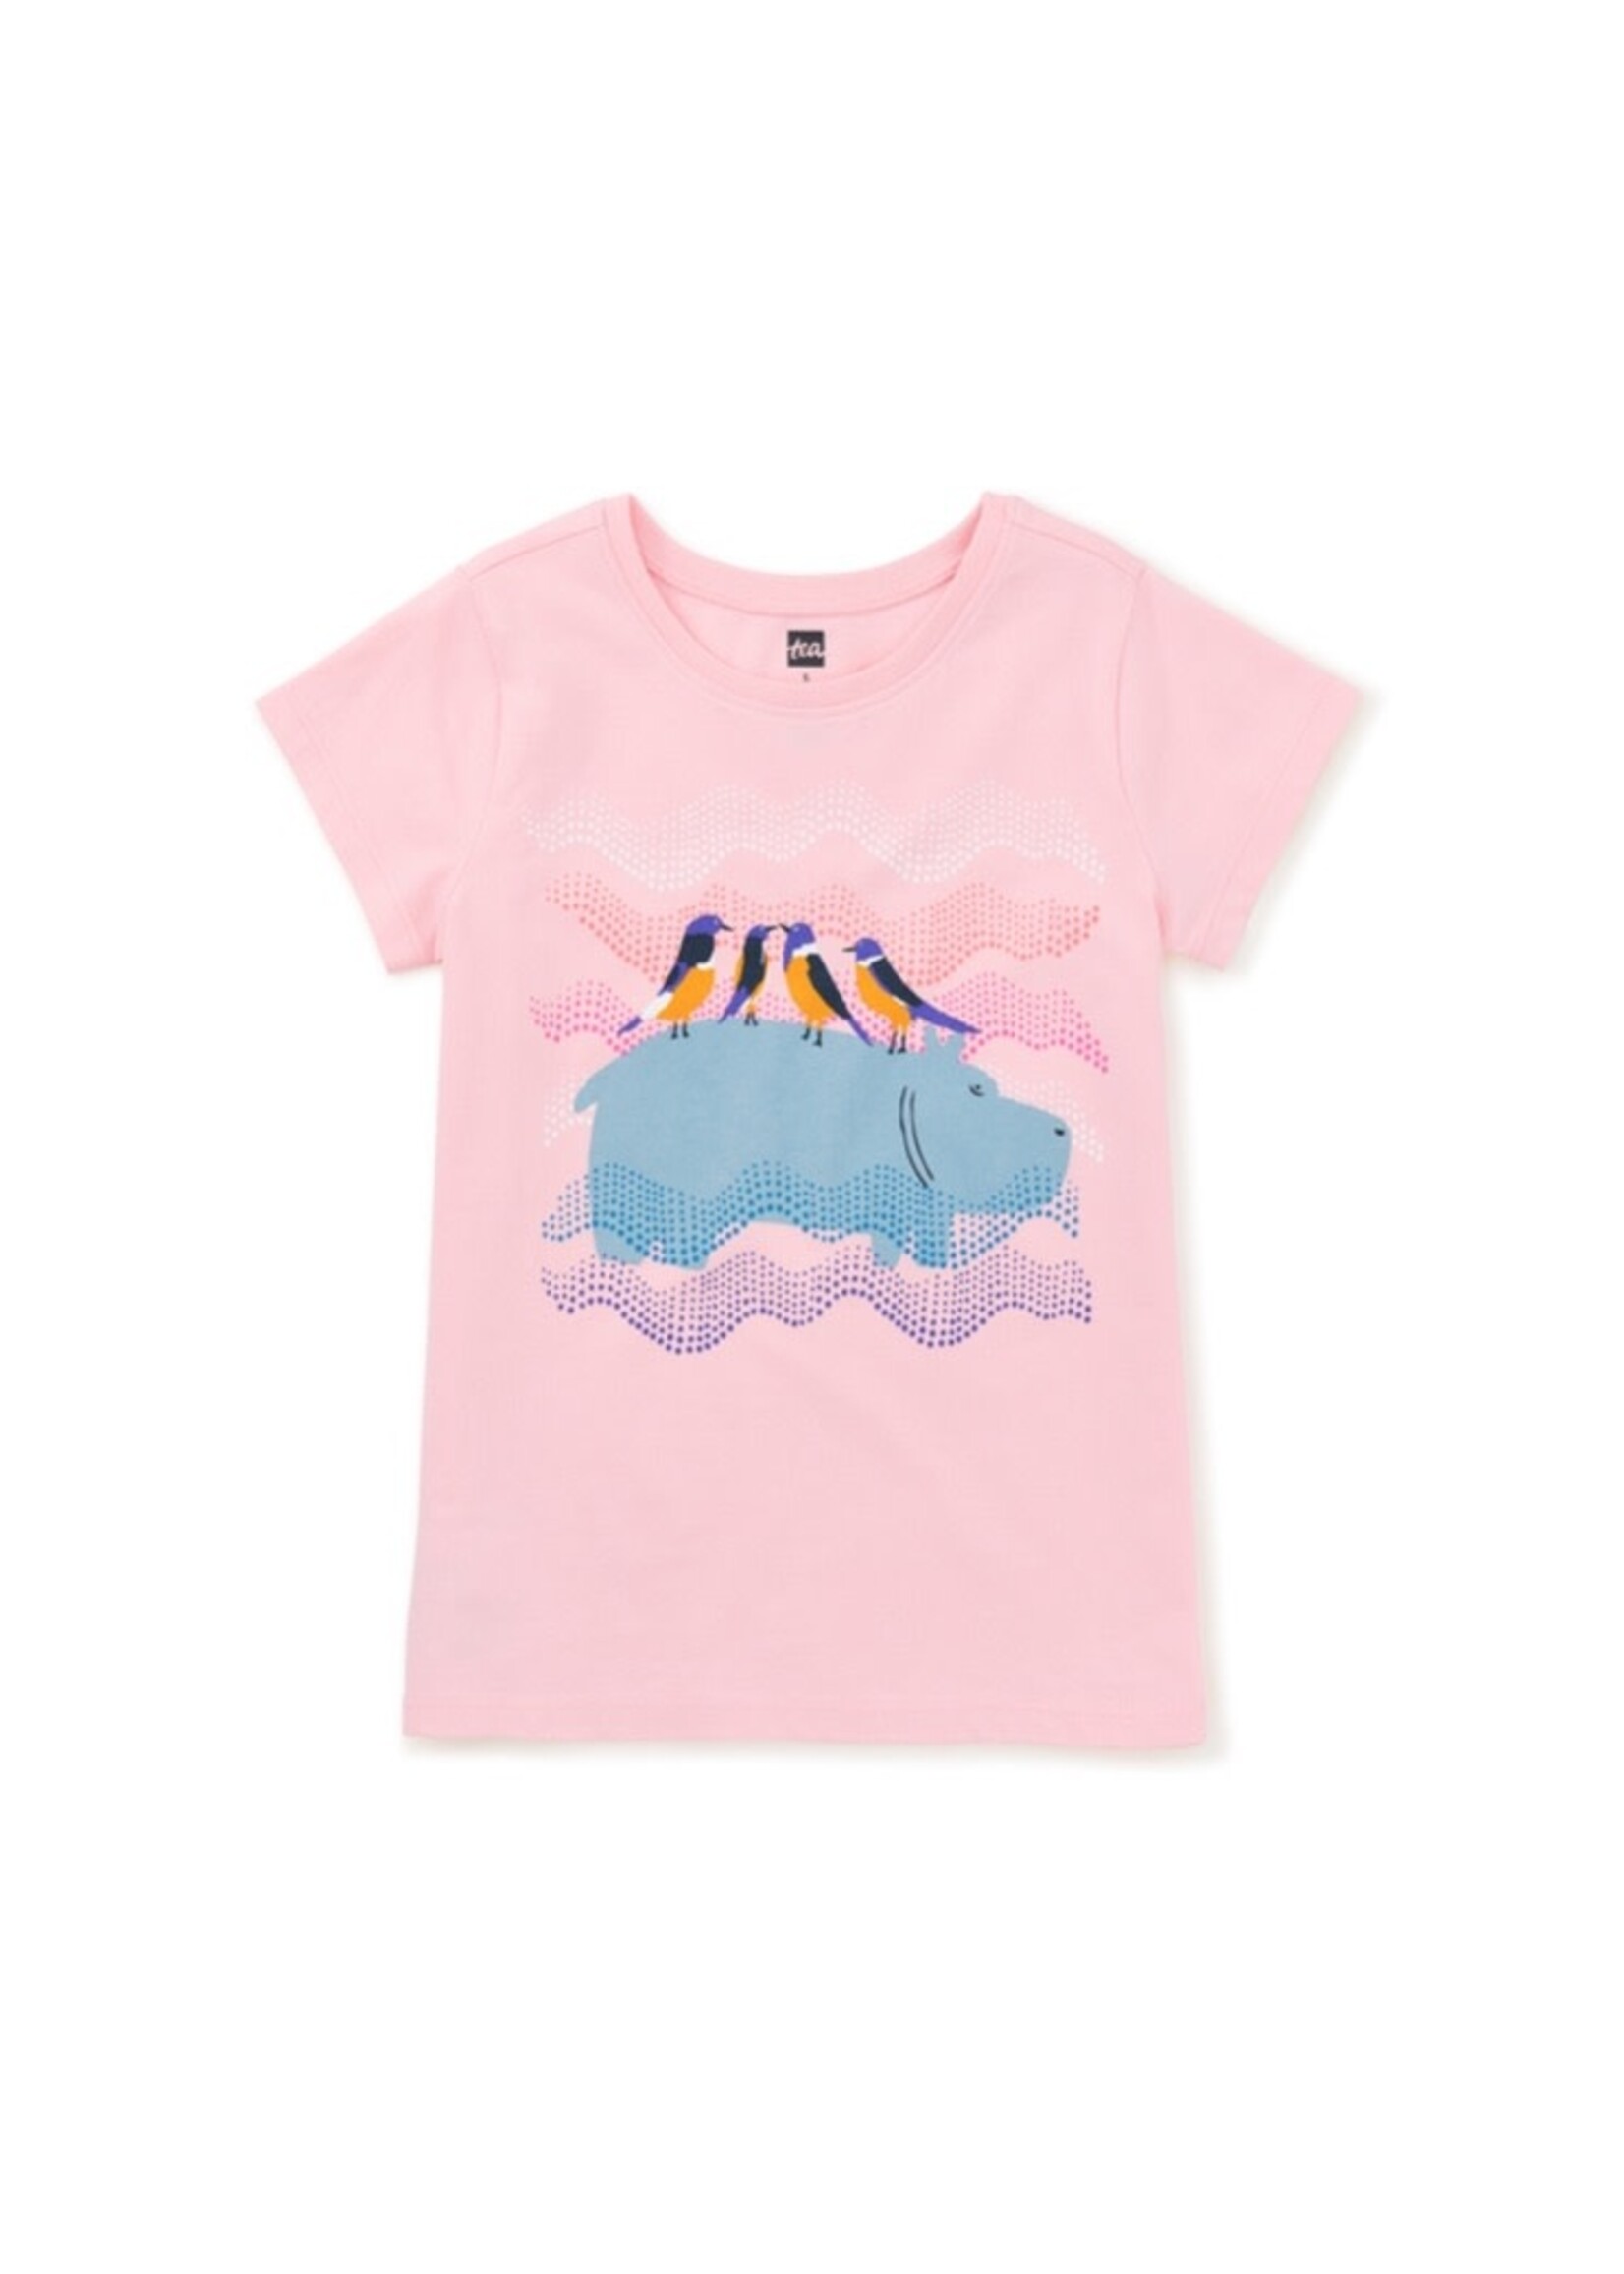 Tea Collection Tea Collection, Hippo & Friends Graphic Tee || Blossom